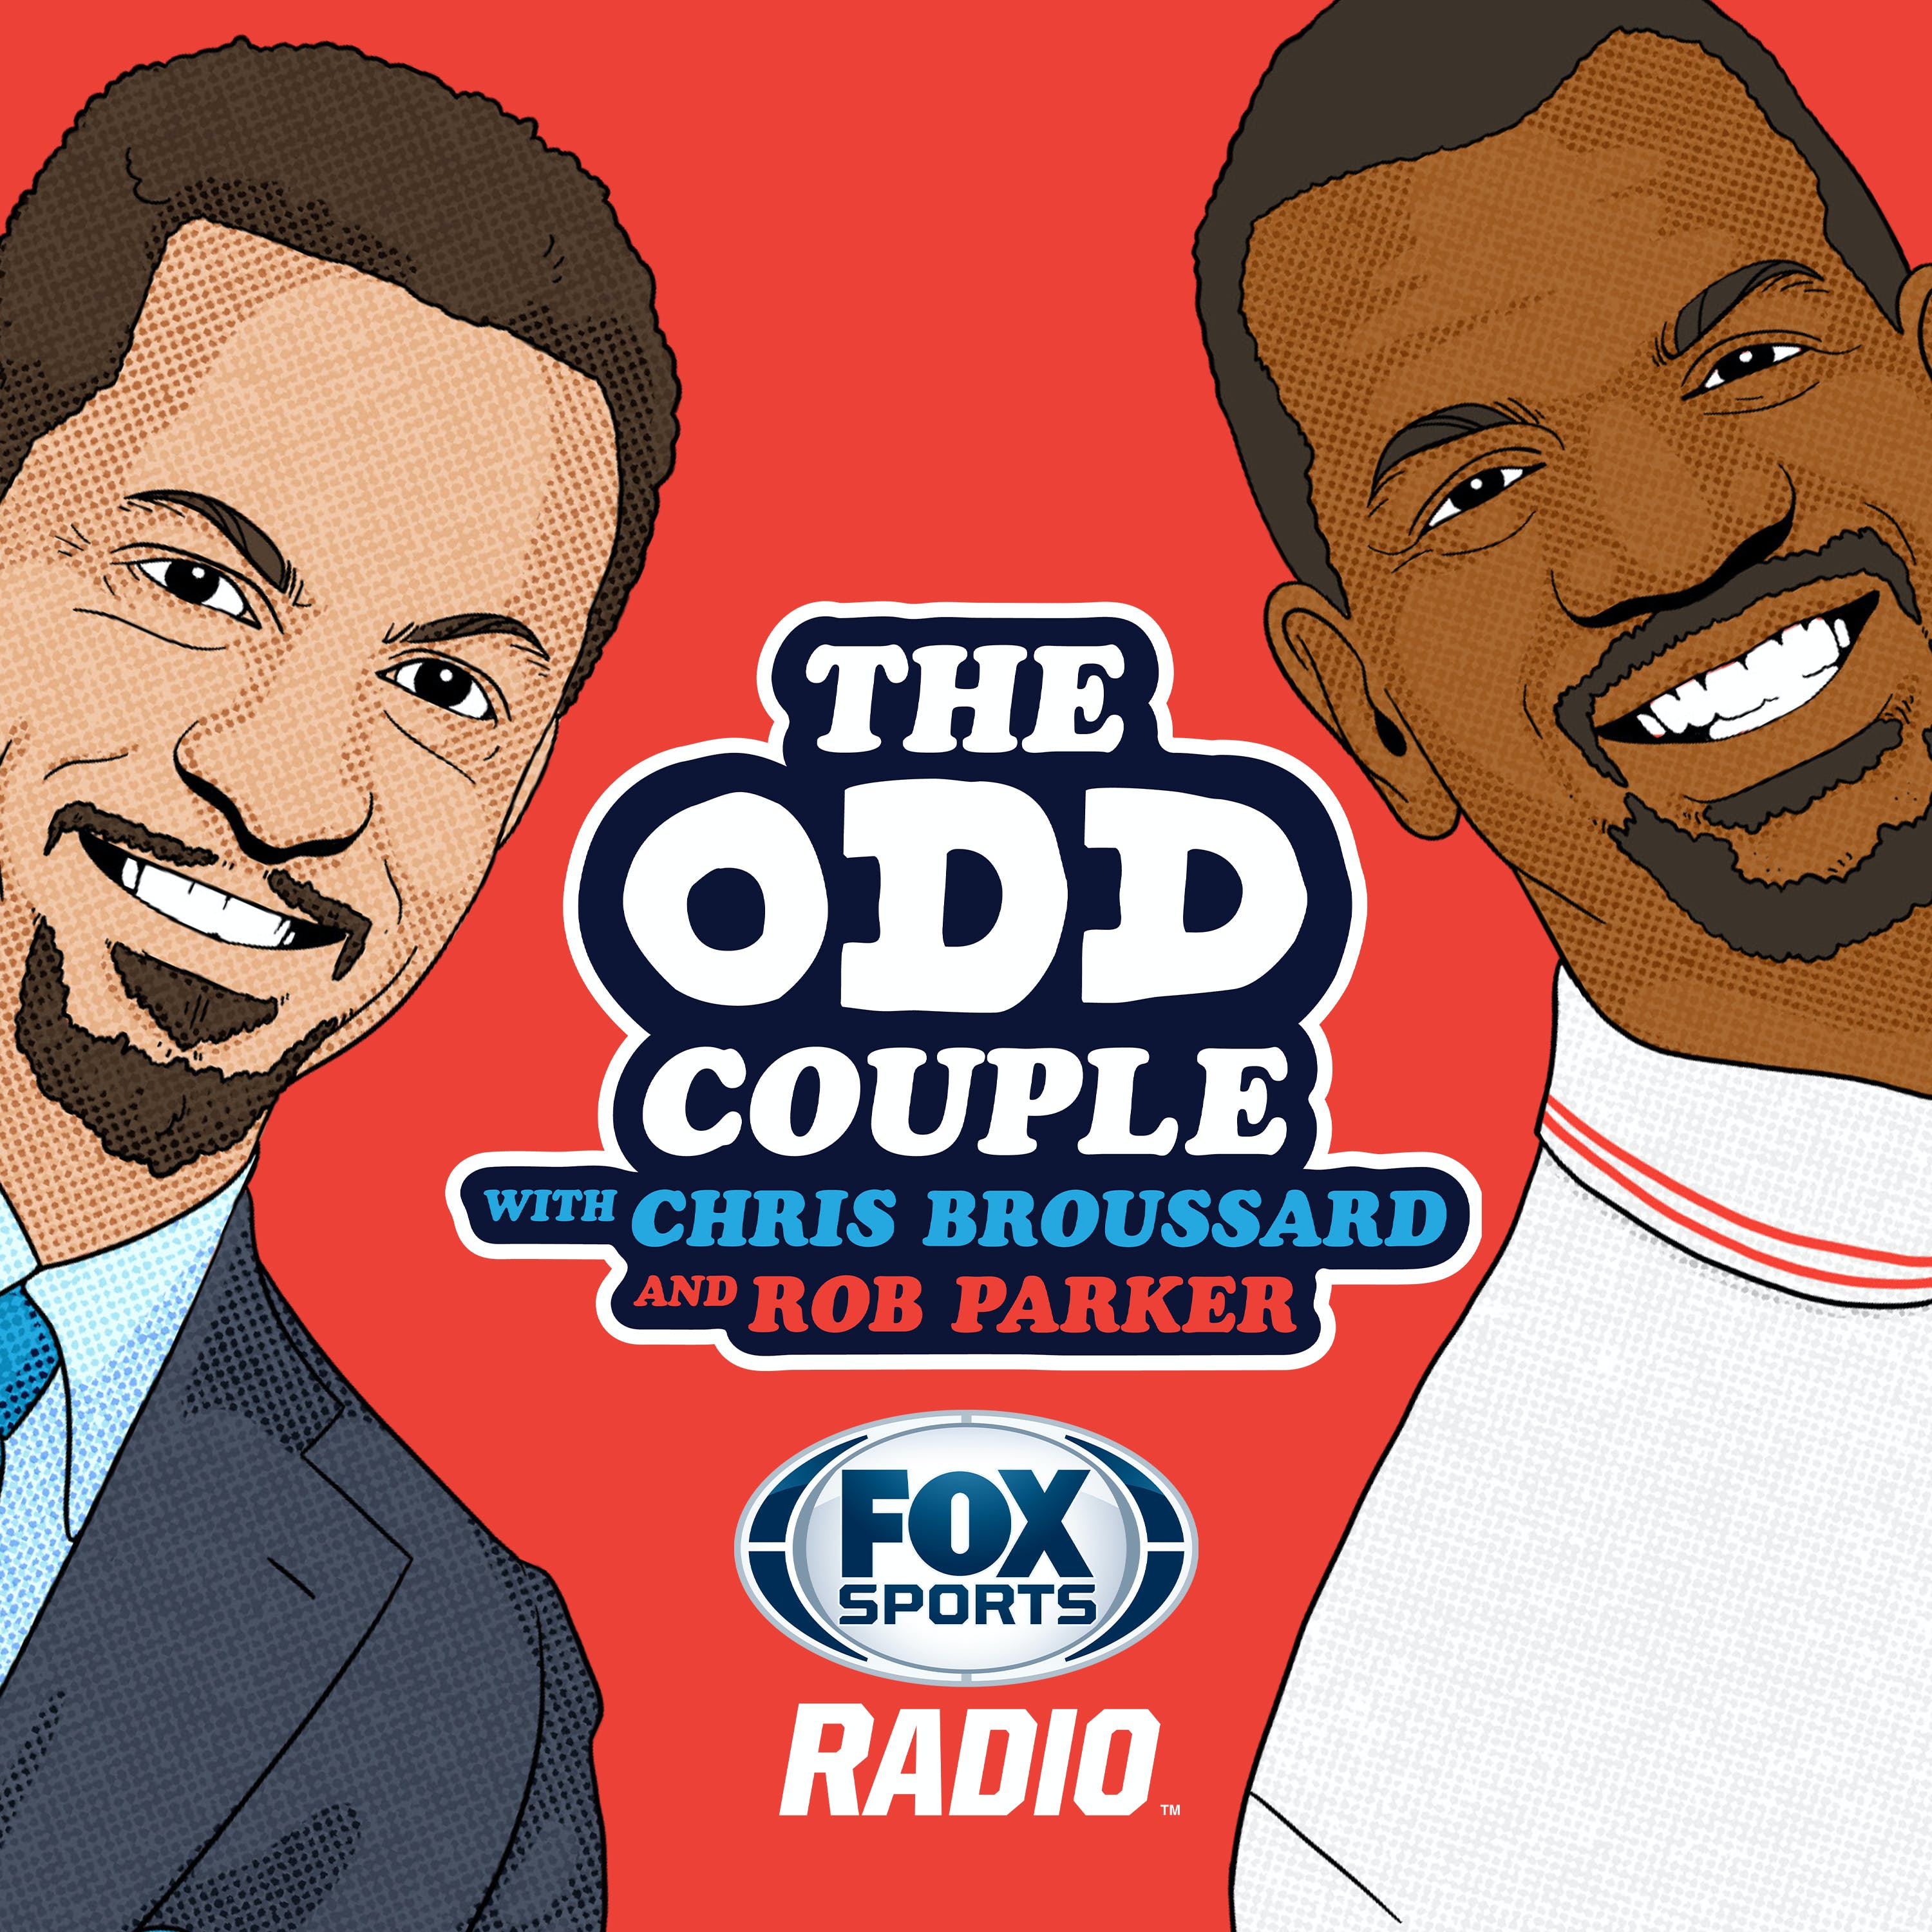 11/23/2021 - Best of The Odd Couple